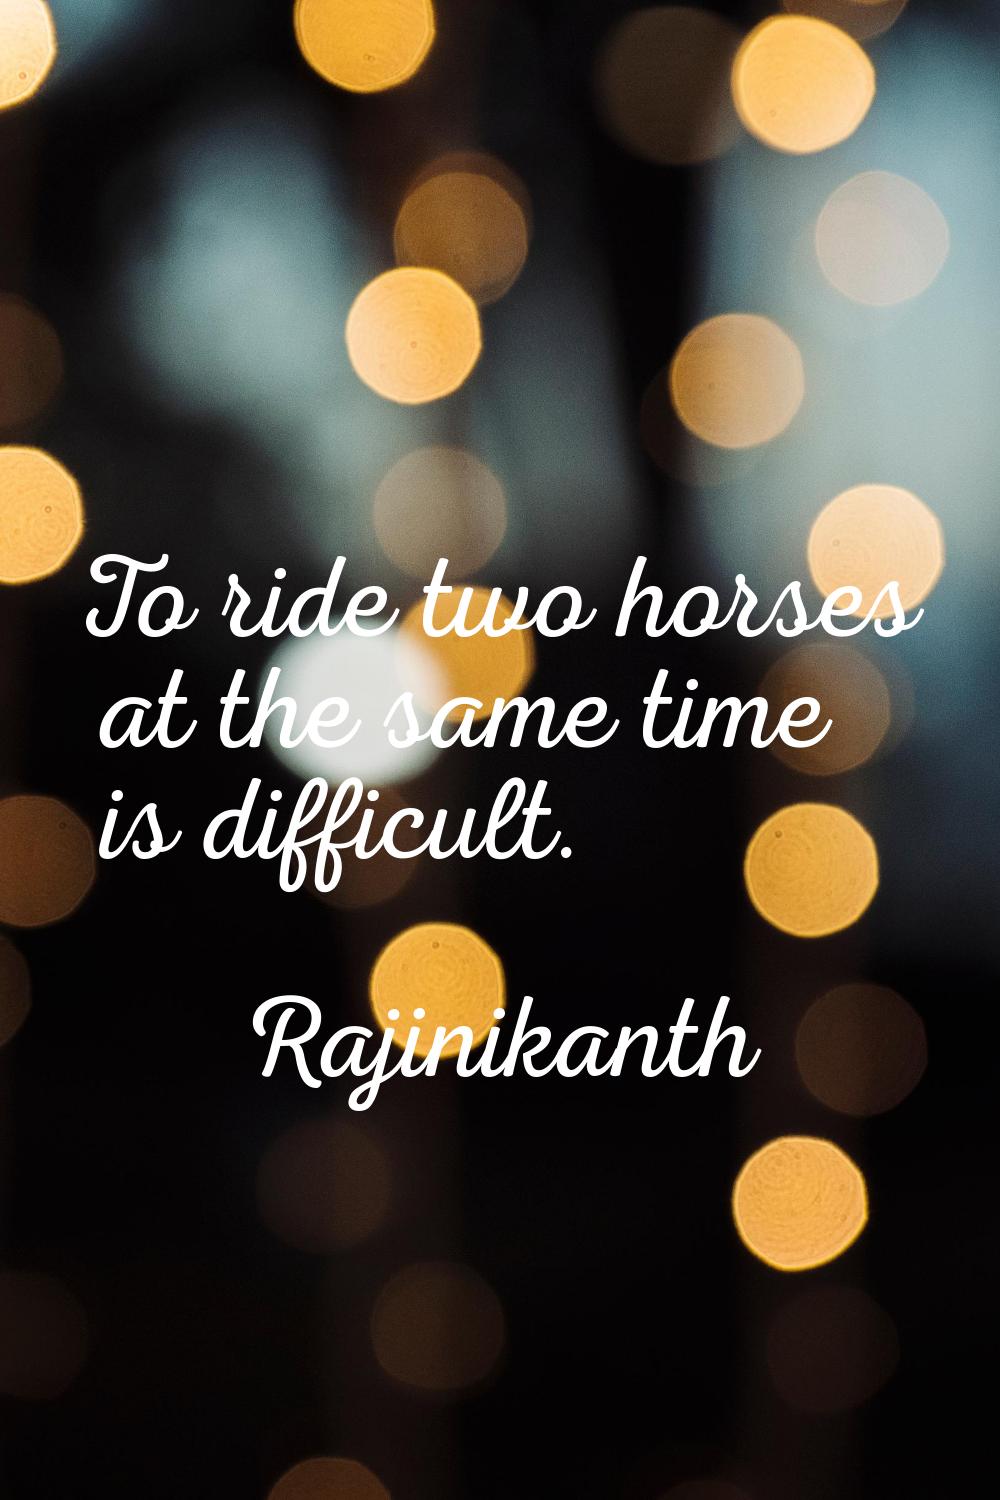 To ride two horses at the same time is difficult.